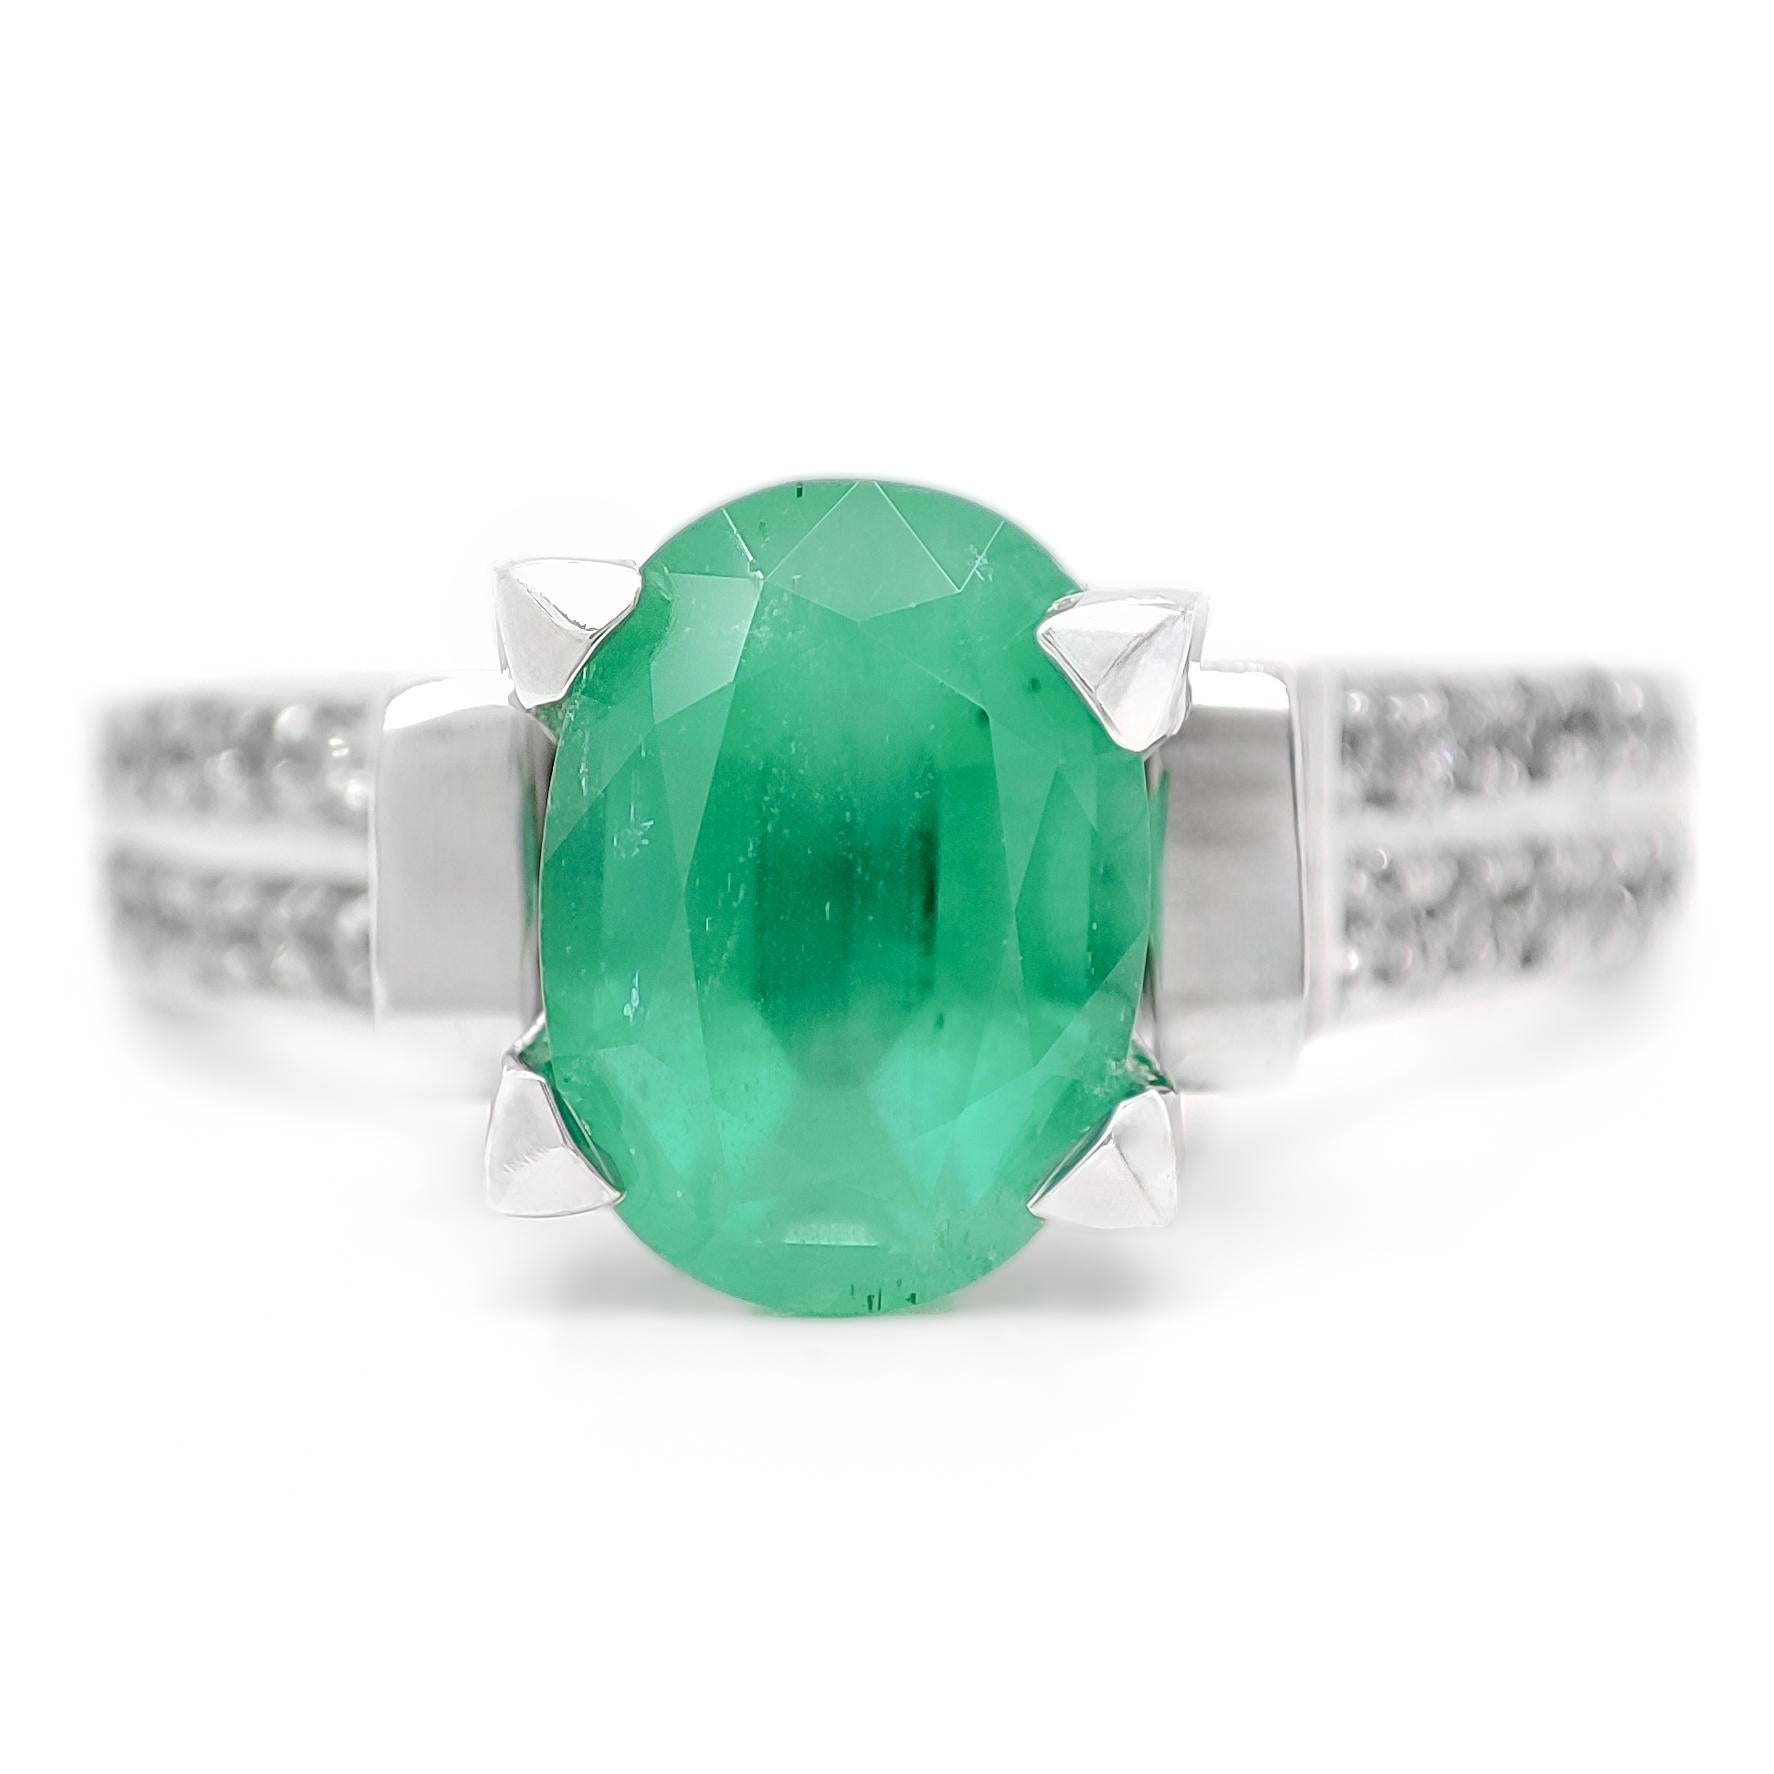 FOR US BUYERS NO VAT

This charming ring features a 1.47-carat green emerald as its focal point, displaying the enchanting green hue that emeralds are known for.

Enhancing the emerald's beauty are 40 diamonds, totaling 0.23 carats. These diamonds